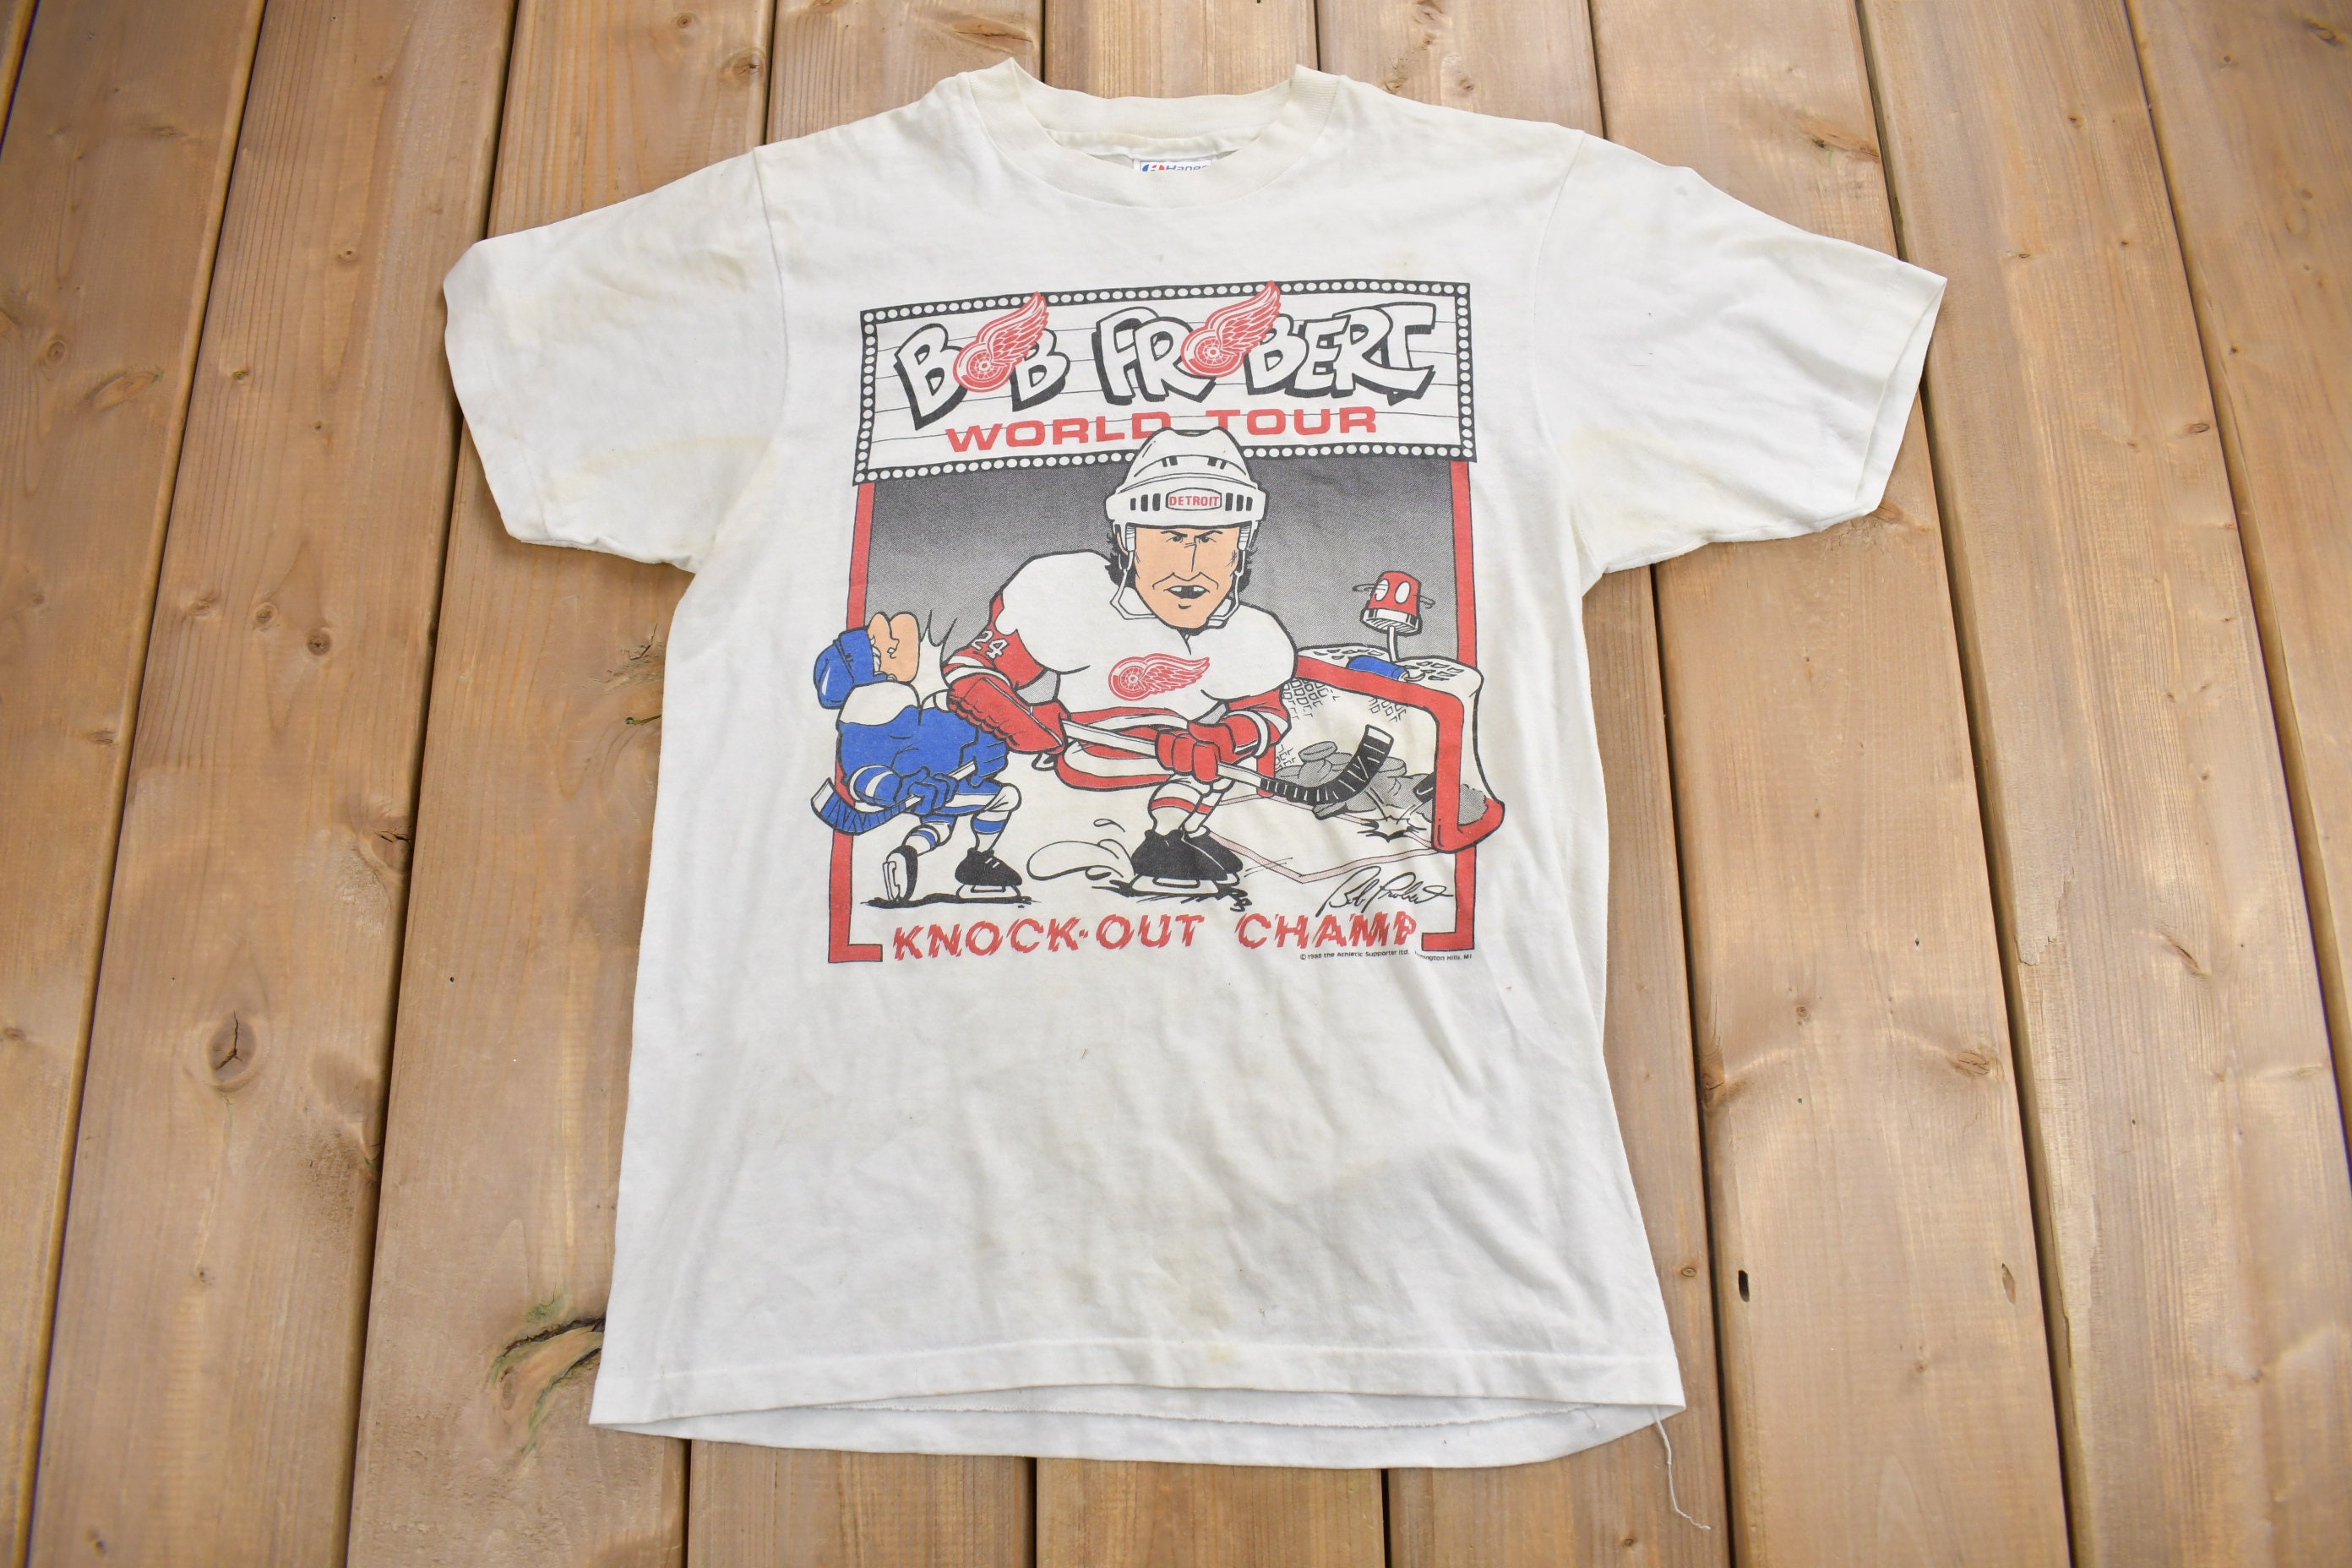 ShopCrystalRags Detroit Red Wings, NHL One of A Kind Vintage Tee Shirt with All Over Crystal Design.